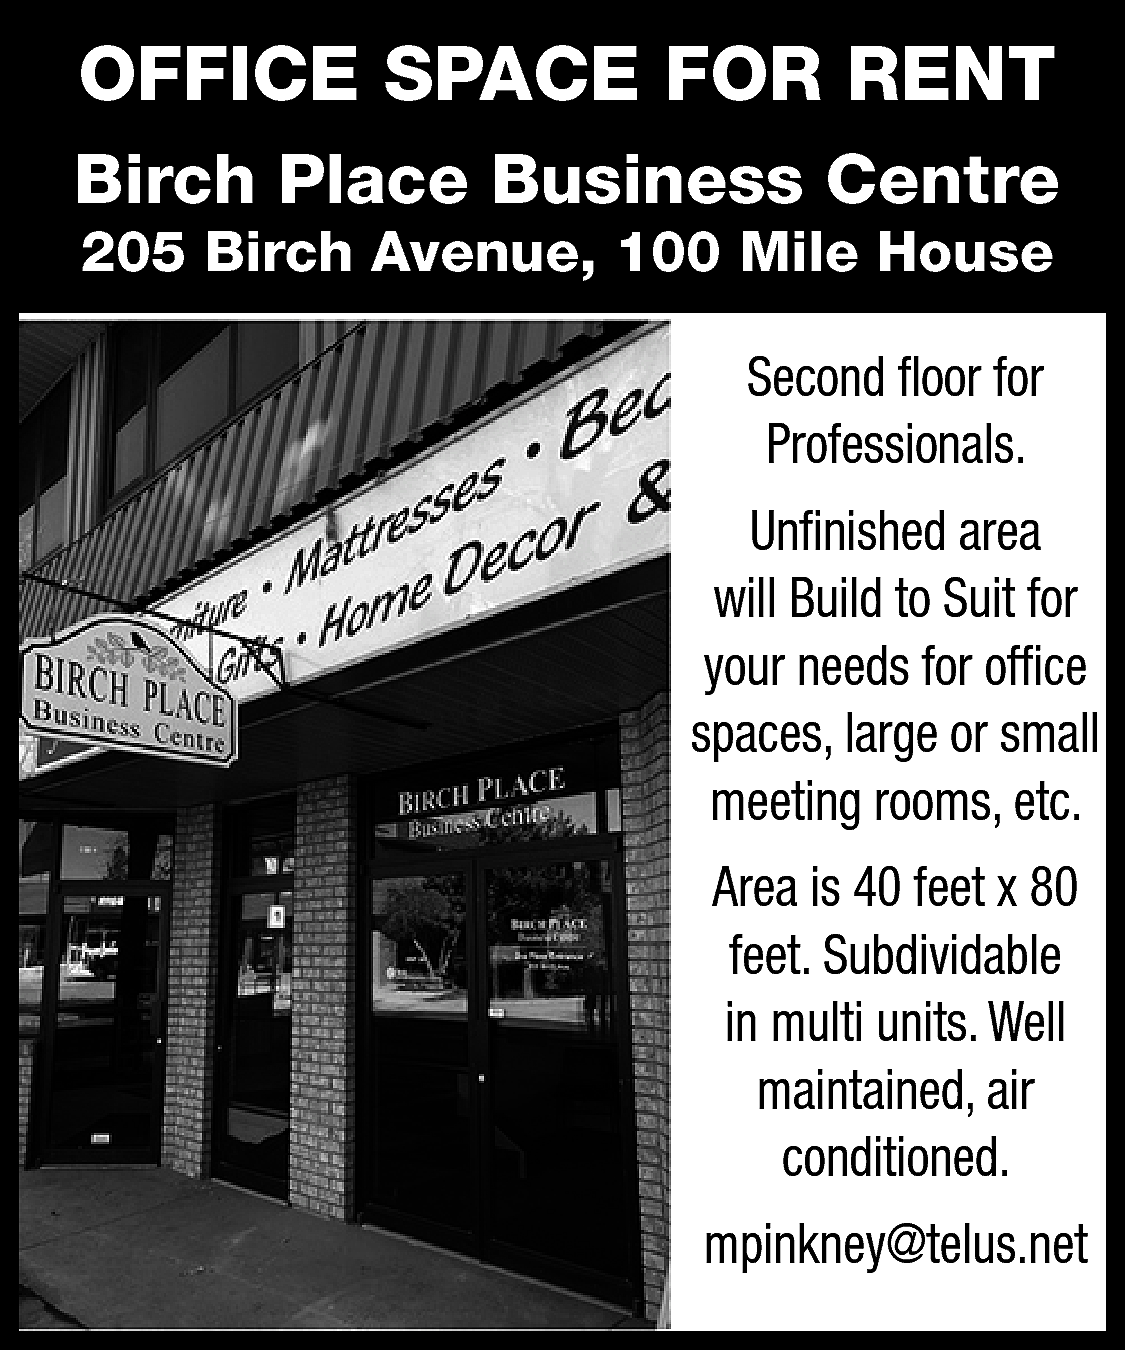 OFFICE SPACE FOR RENT <br>Birch  OFFICE SPACE FOR RENT  Birch Place Business Centre  205 Birch Avenue, 100 Mile House  Second floor for  Professionals.  Unfinished area  will Build to Suit for  your needs for office  spaces, large or small  meeting rooms, etc.  Area is 40 feet x 80  feet. Subdividable  in multi units. Well  maintained, air  conditioned.  mpinkney@telus.net    